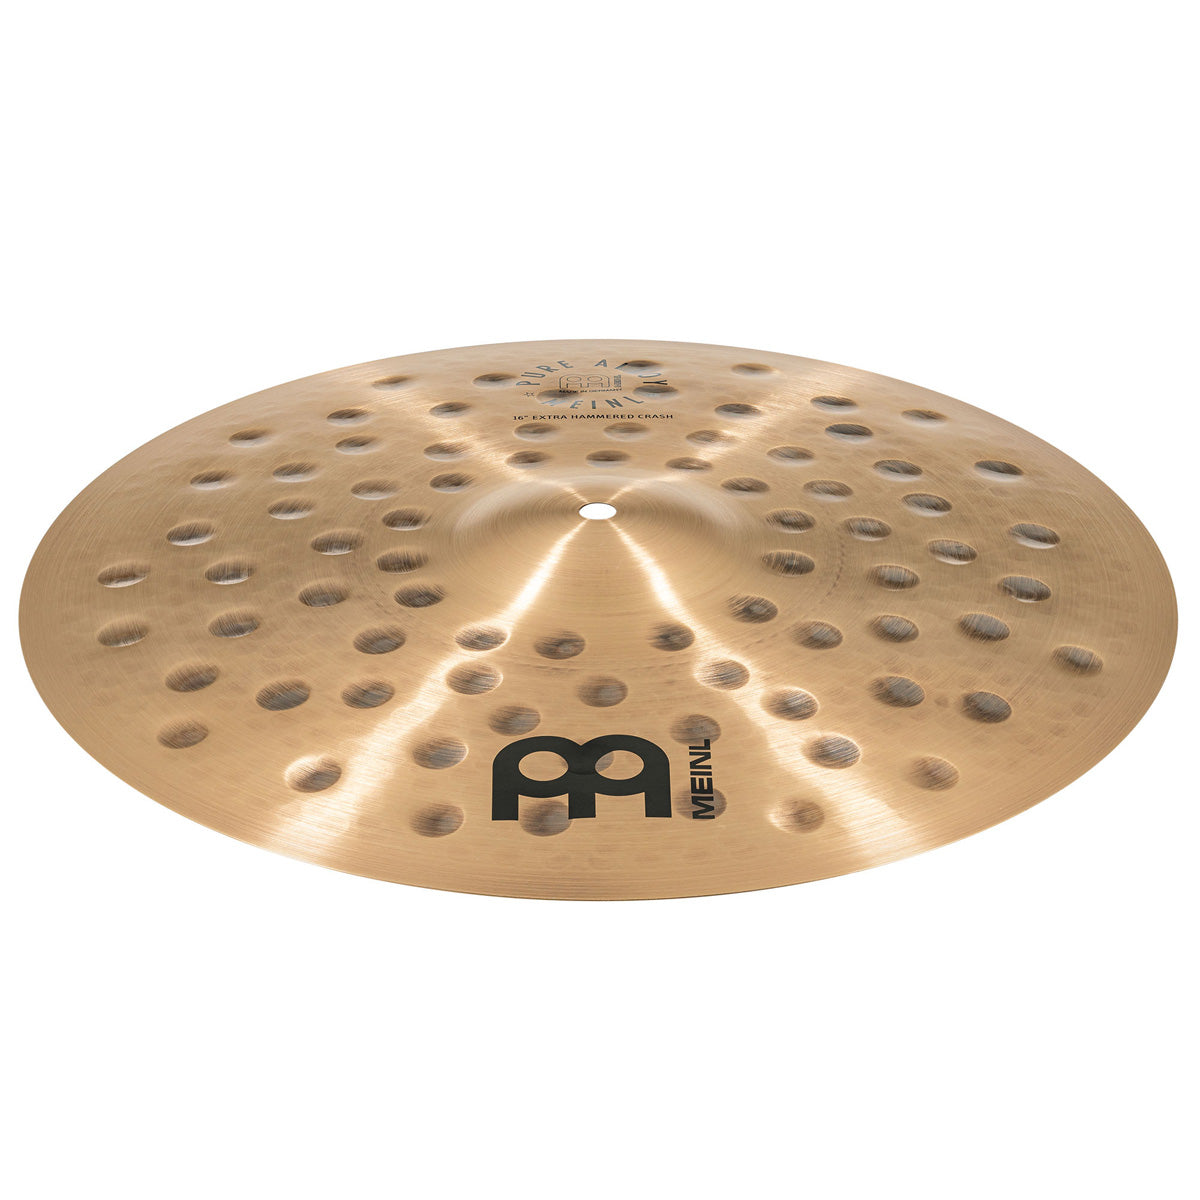 Meinl Pure Alloy 16" Extra Hammered Crash Cymbal